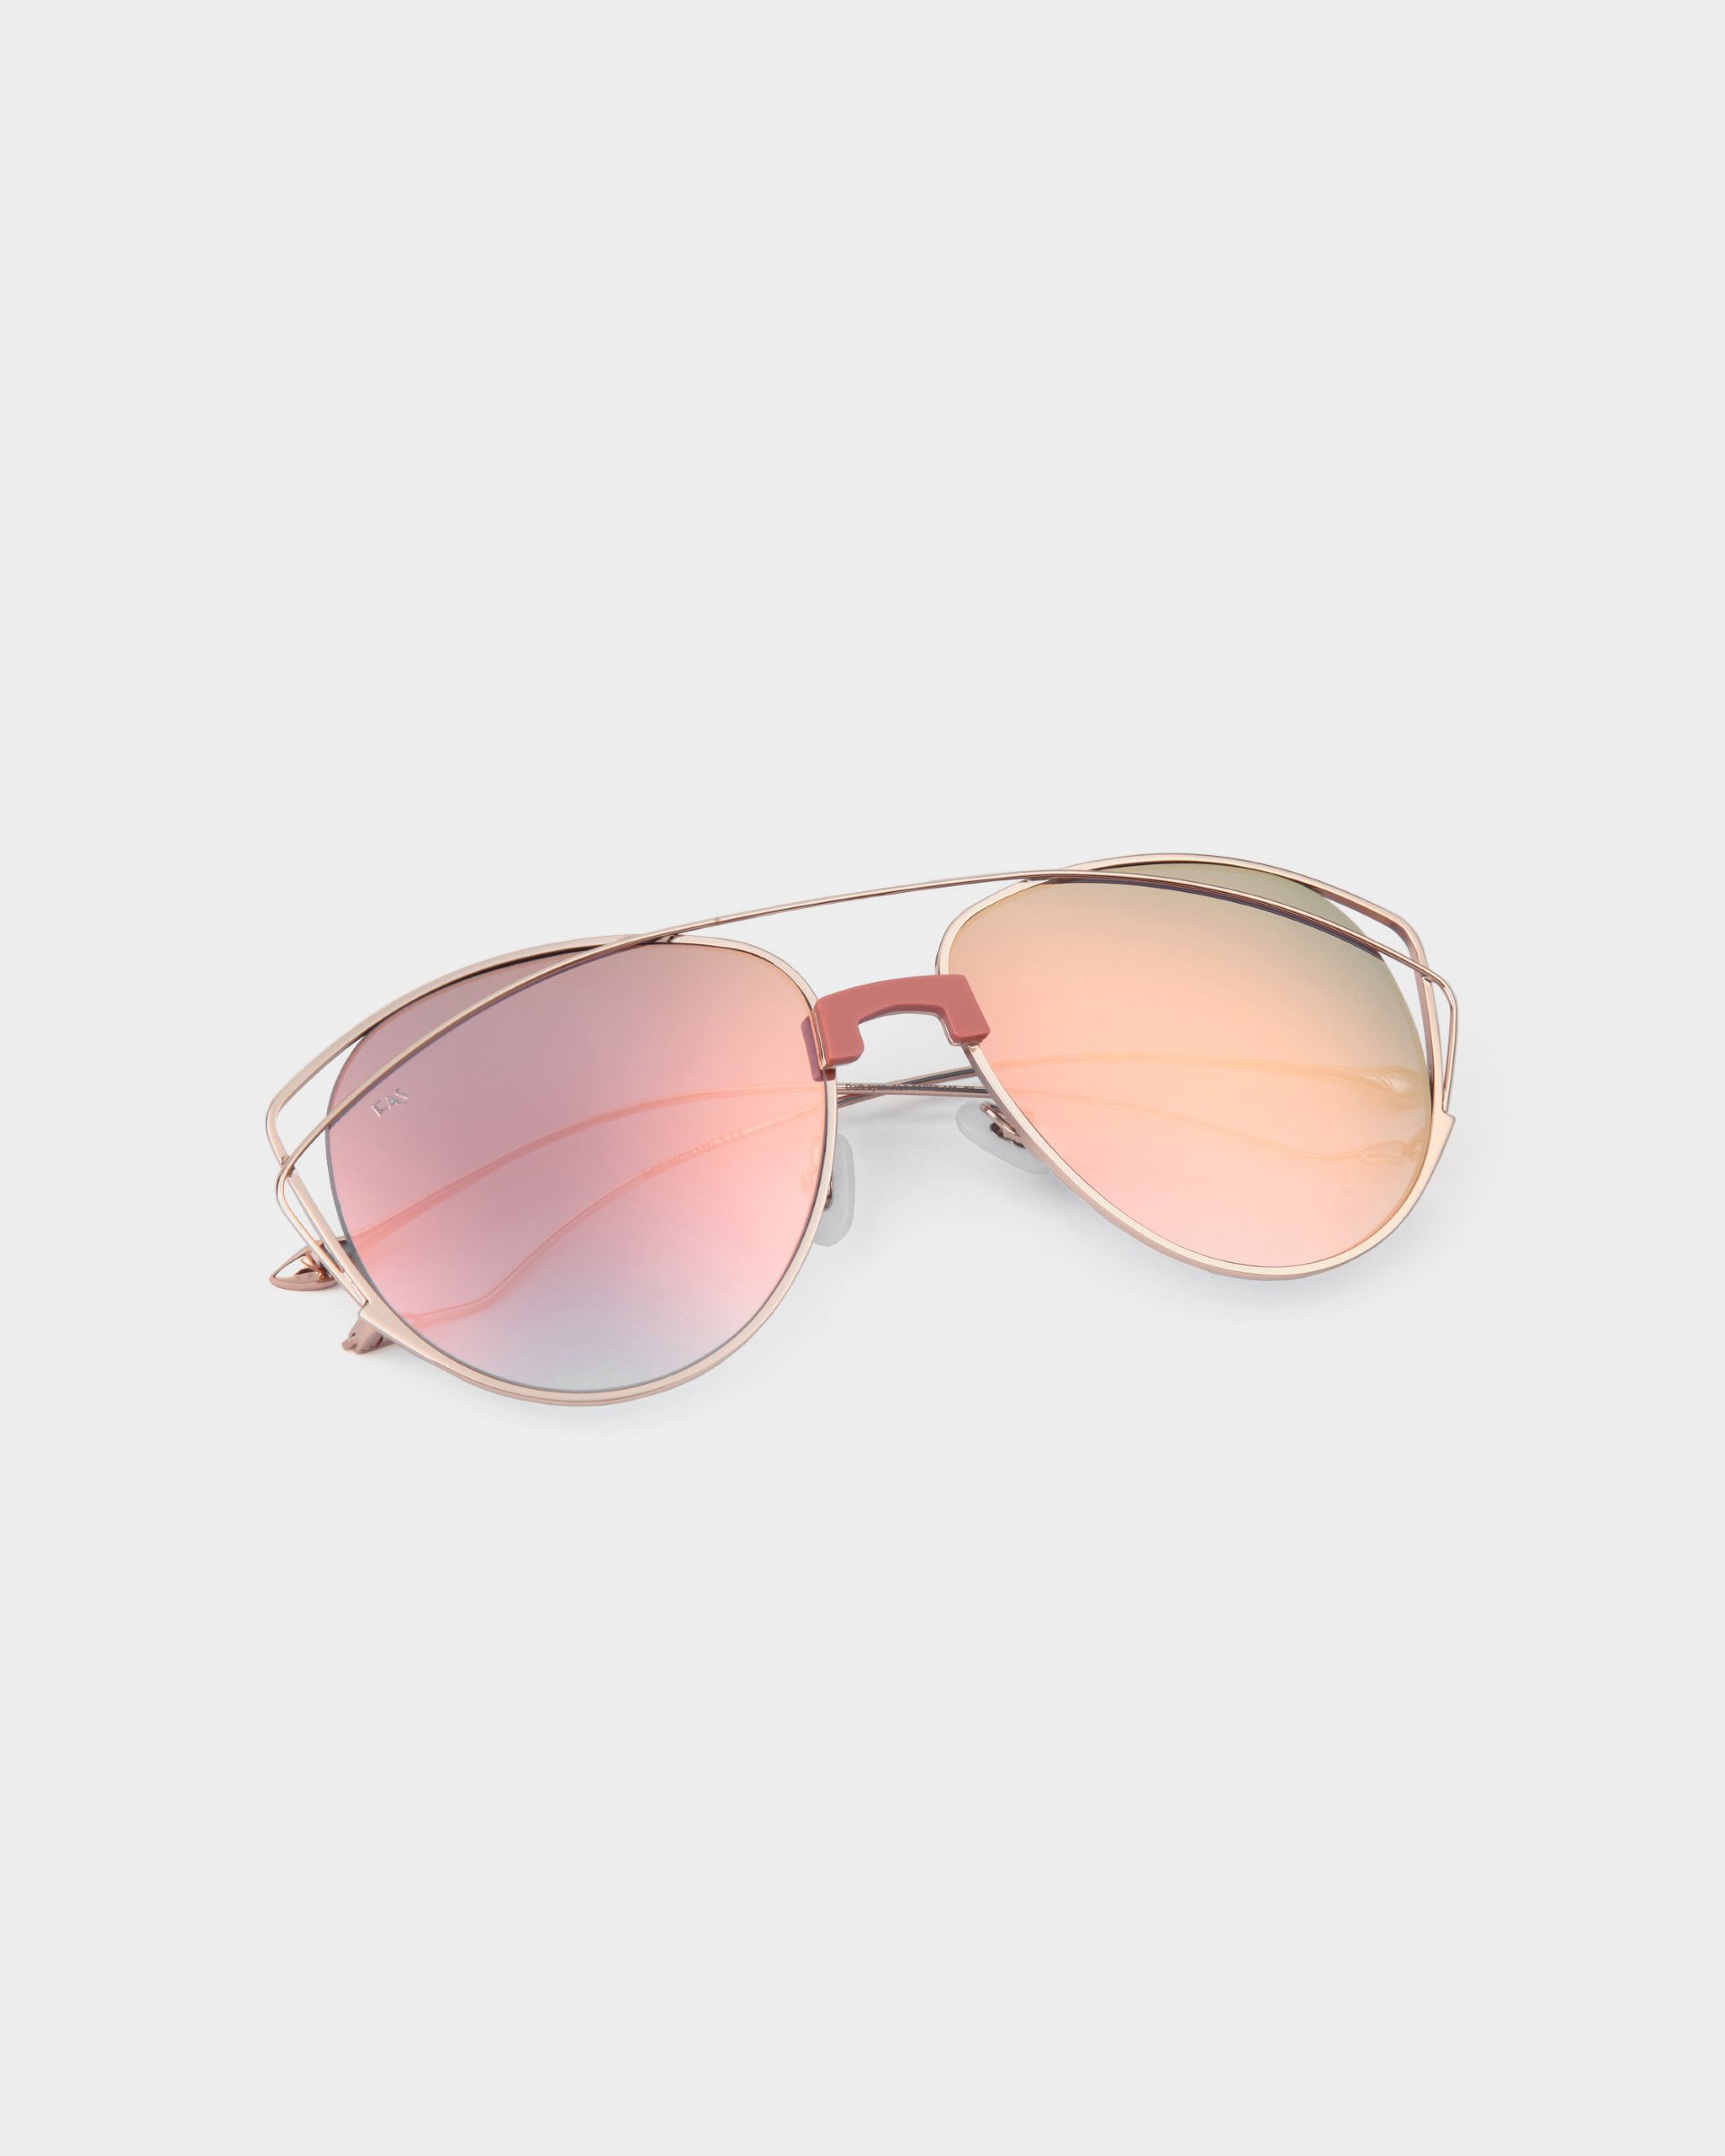 A pair of aviator-style sunglasses with stainless steel frames and pink and orange gradient nylon lenses, offering 100% UV protection, laid on a light gray background. The product name is Dark Eyes by For Art&#39;s Sake®.